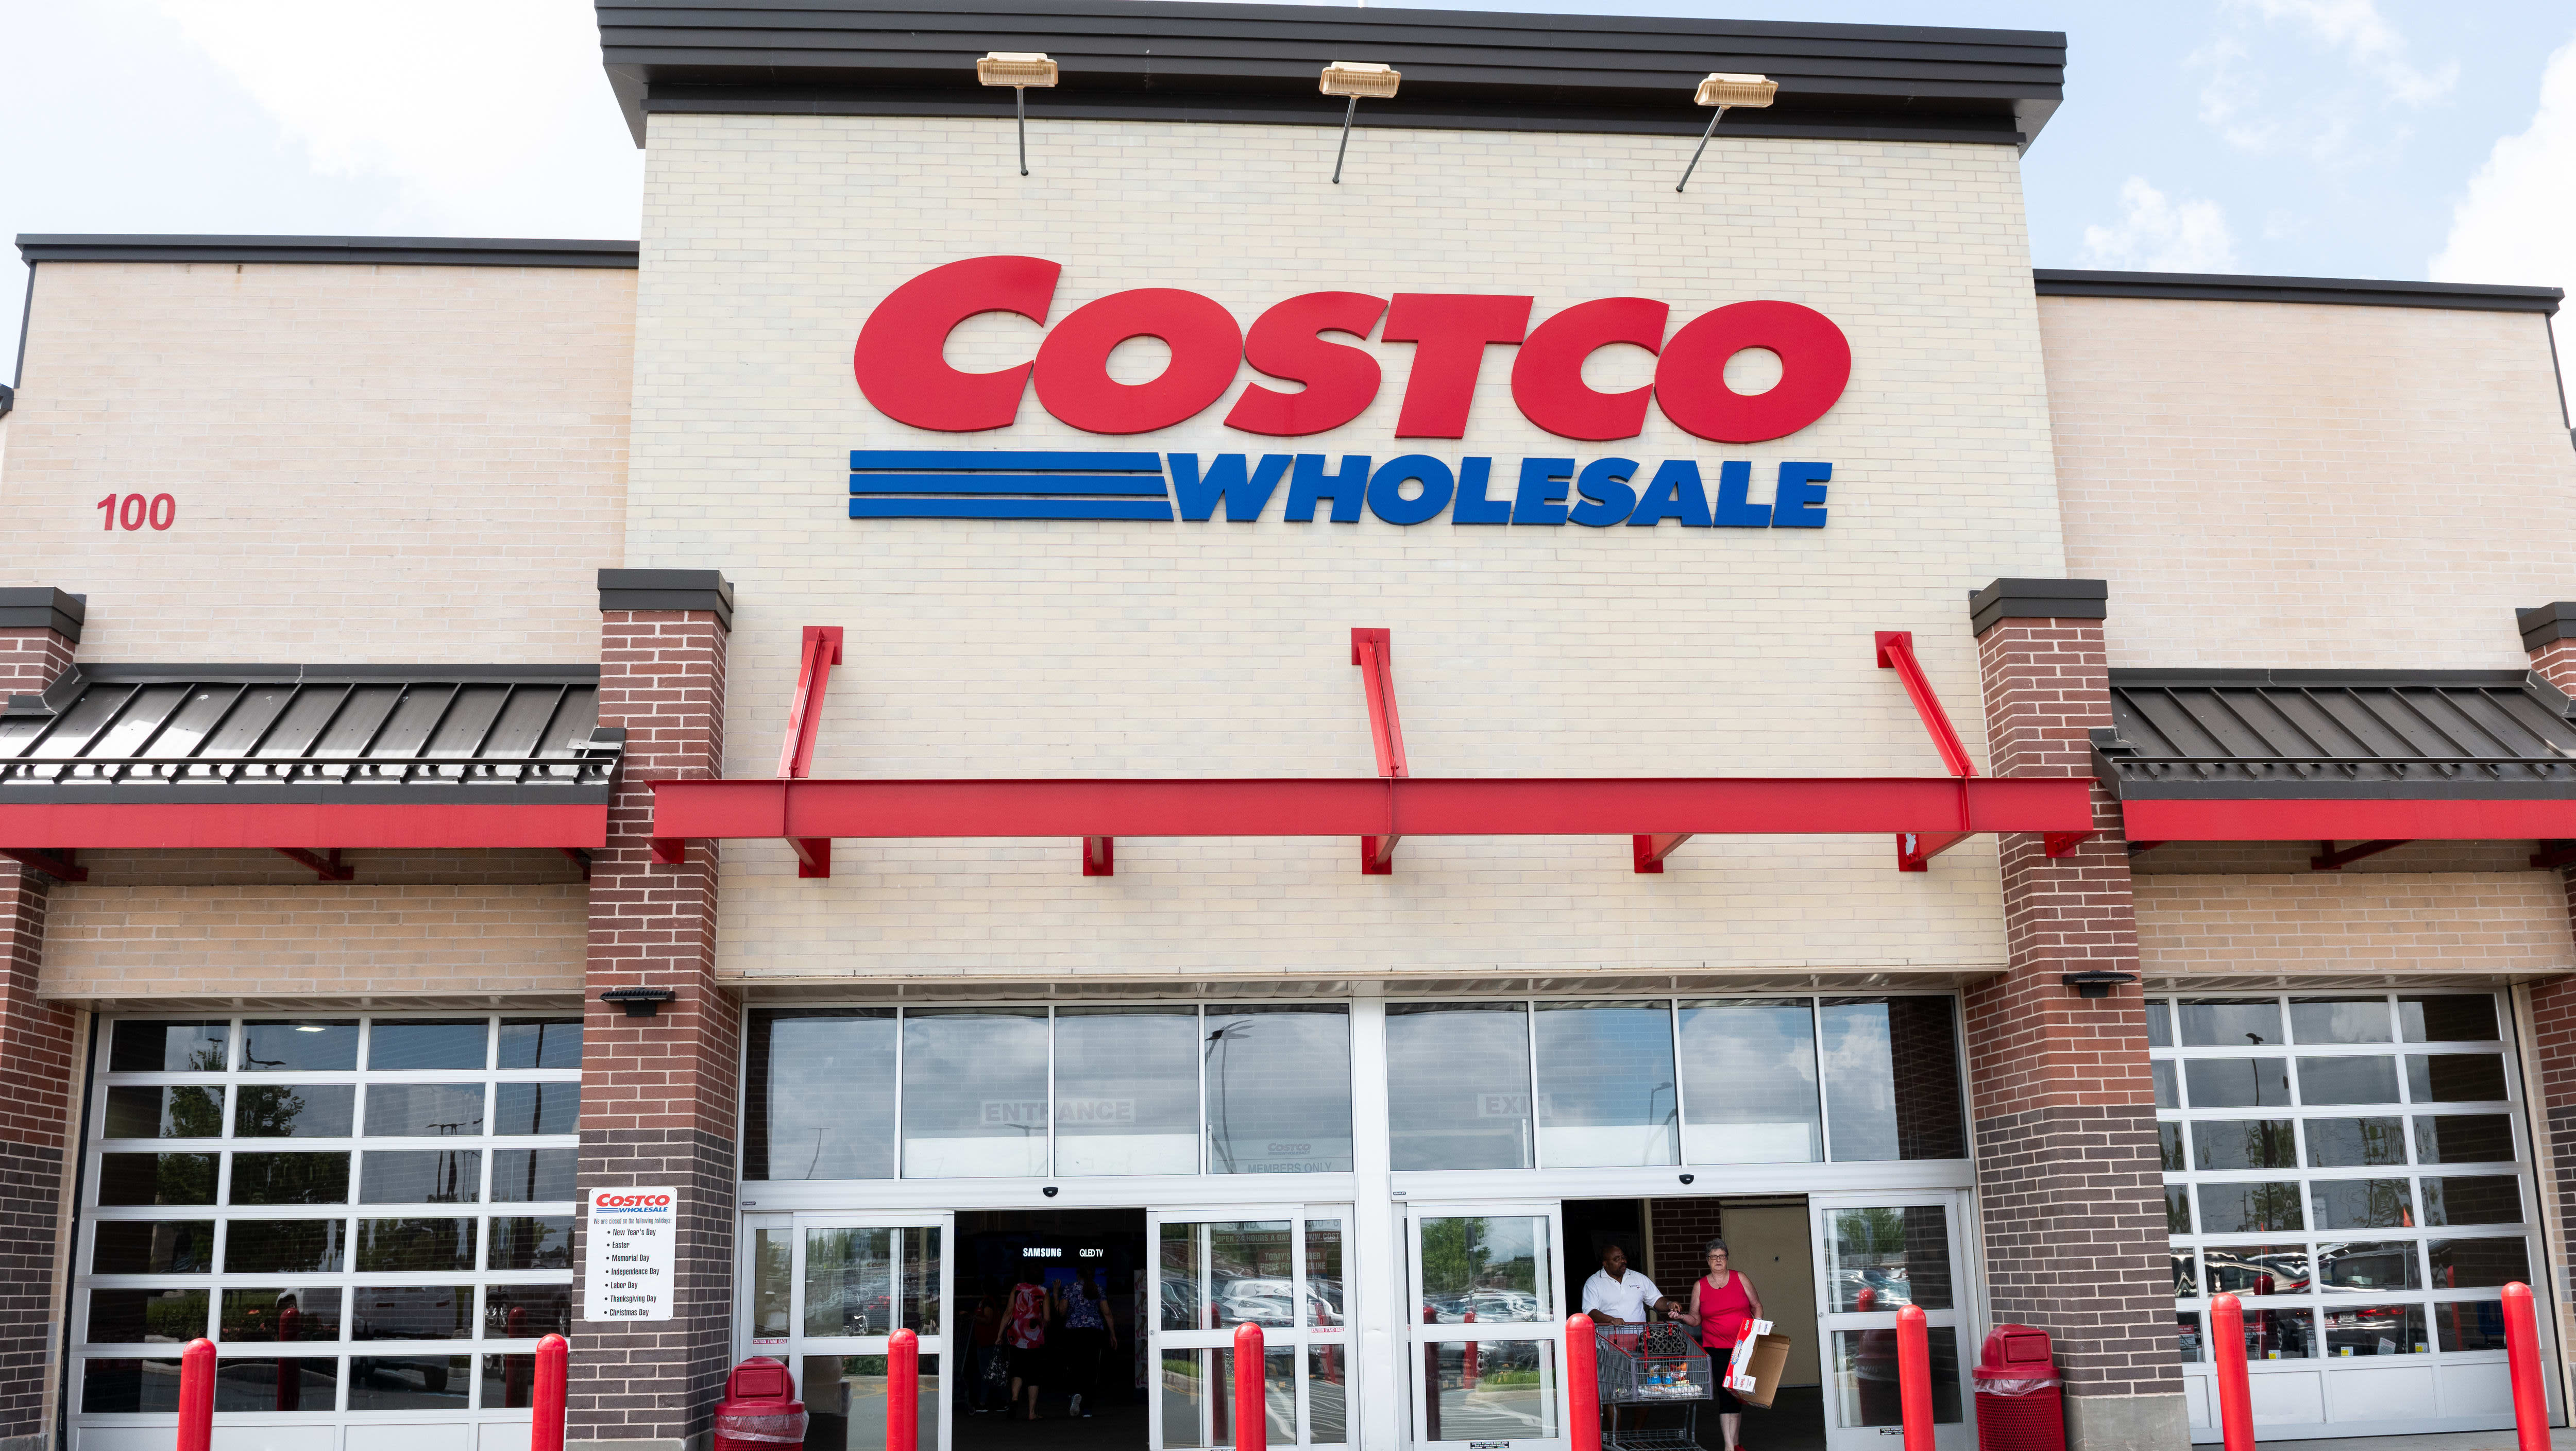 Costco Offers Members $29 Online Health Care Visits - BNN Bloomberg